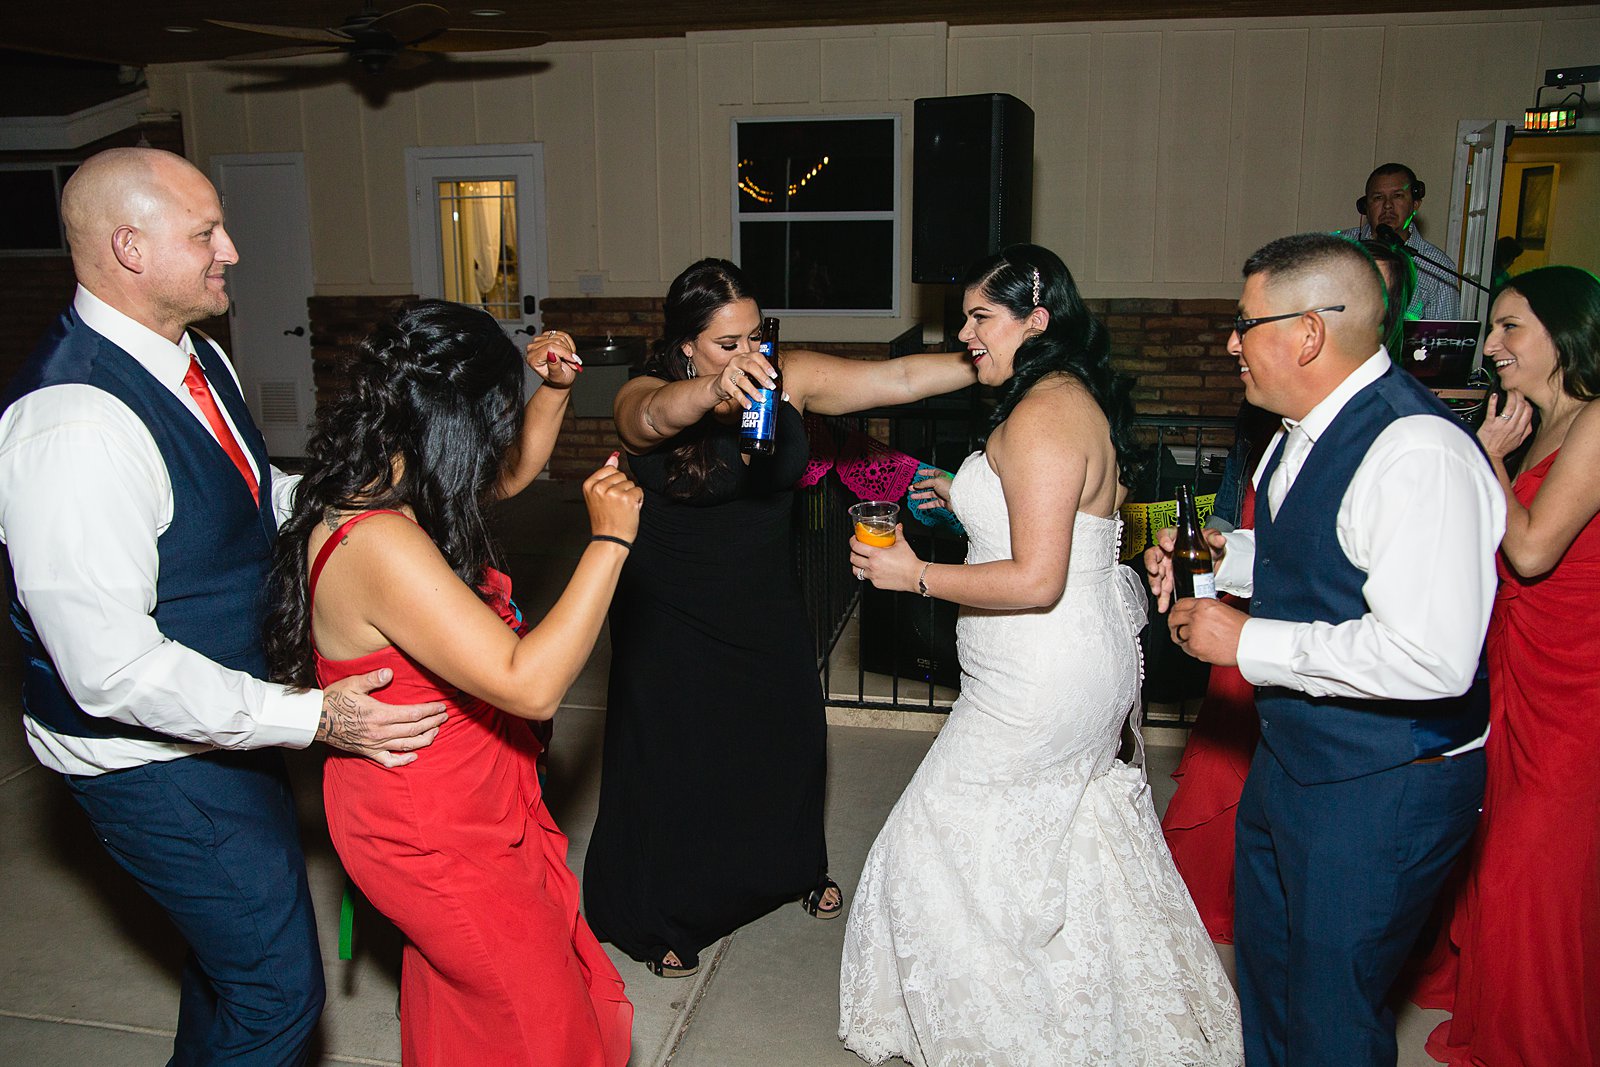 Bride and groom dancing with guests at their The Farmhouse at Schnepf Farms wedding reception by Arizona wedding photographer PMA Photography